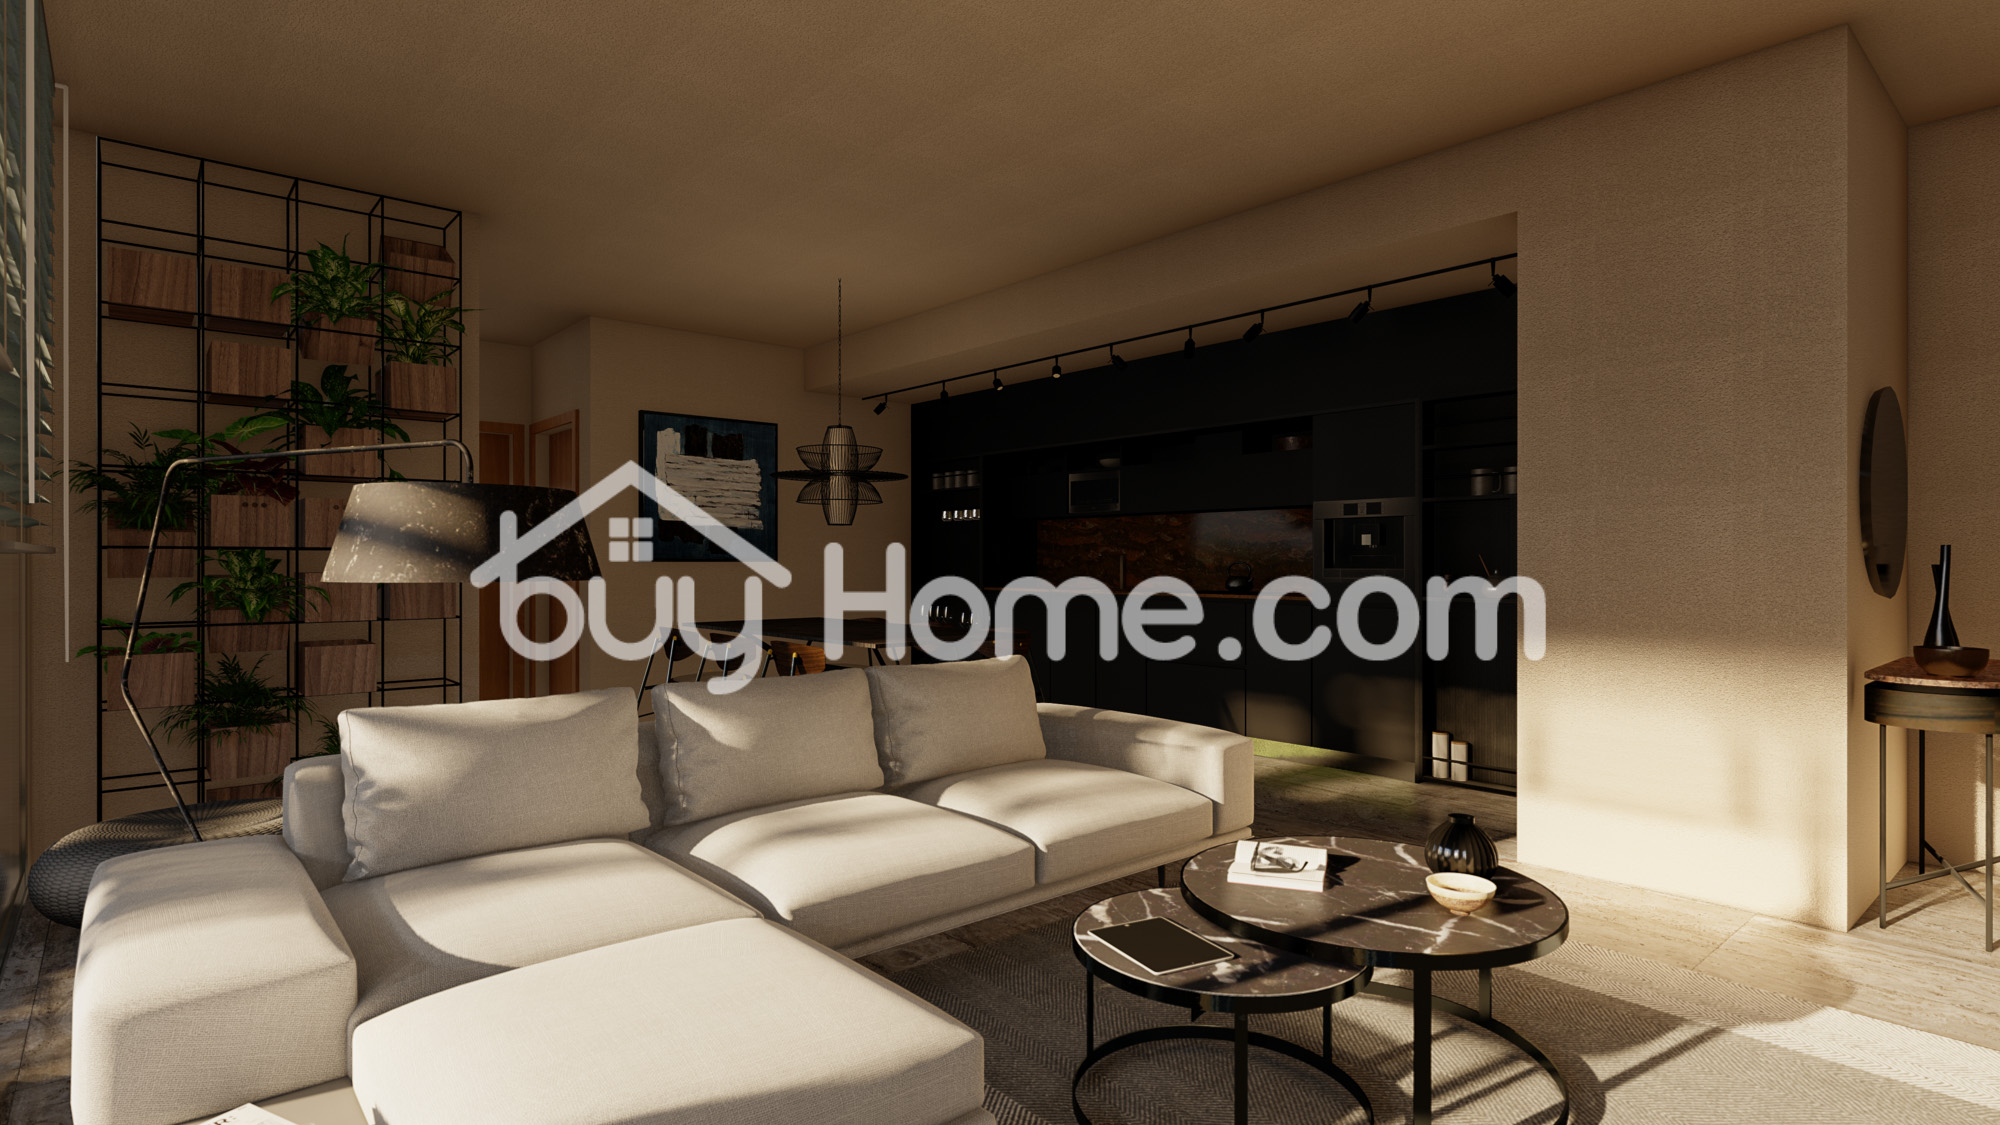 3 BDR apartment | BuyHome